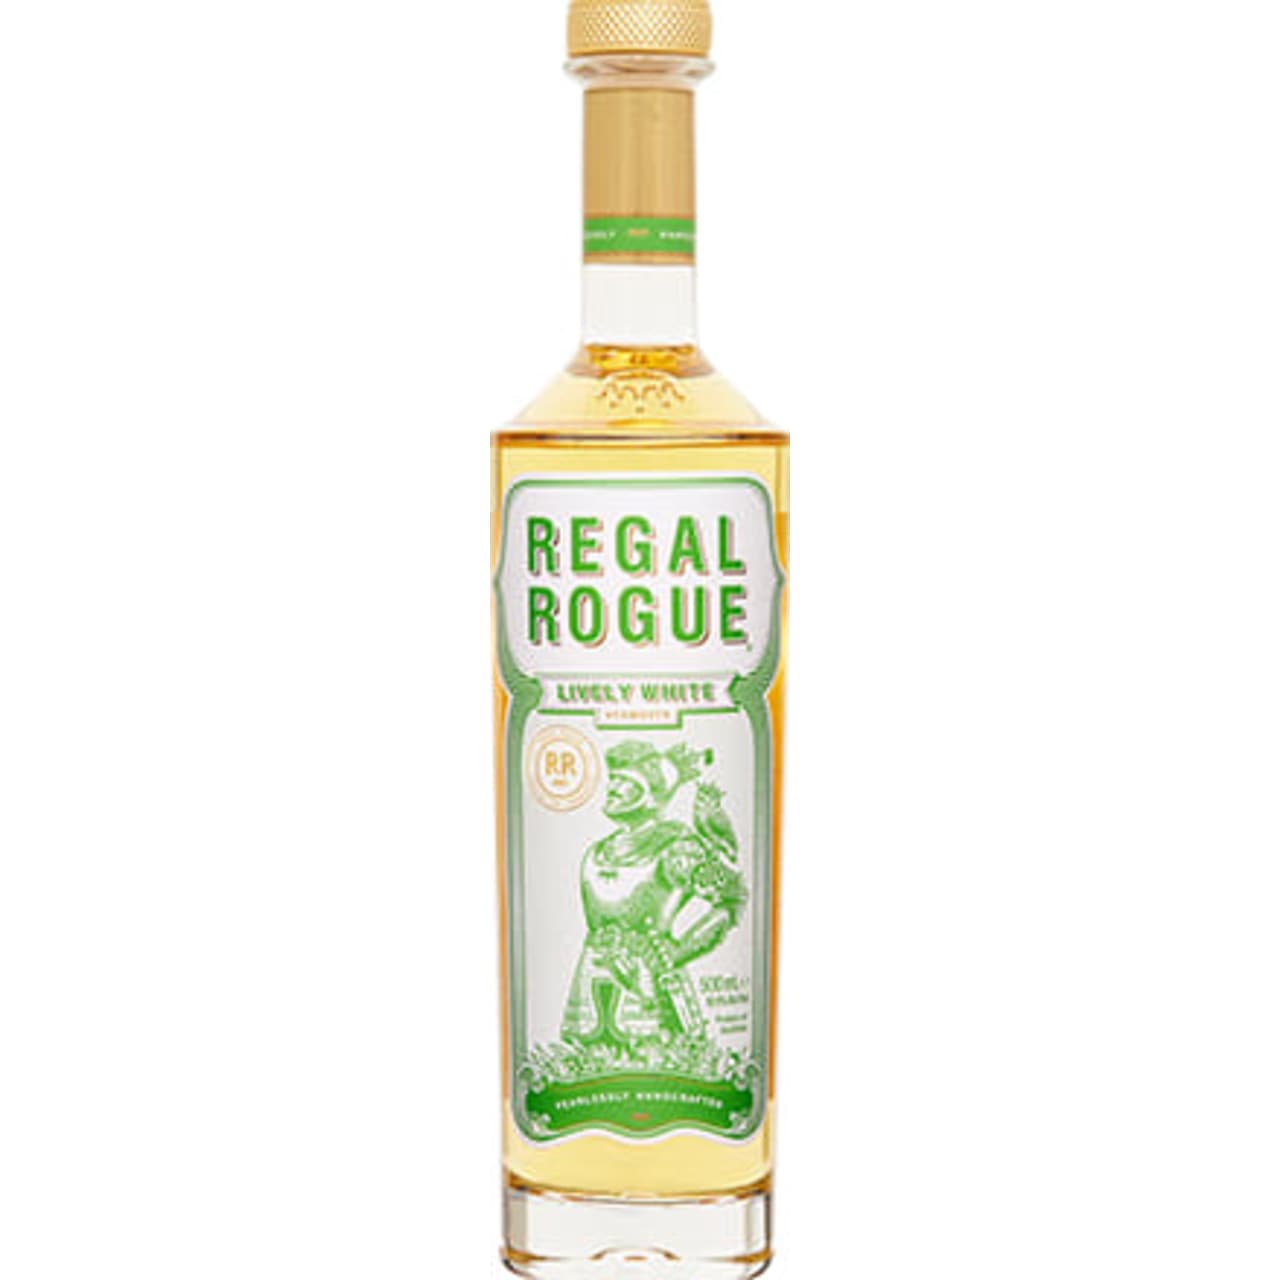 Regal Rogue Lively White is bursting with citrus and floral notes, marrying an Orange, NSW, Organic un-wooded Chardonnay with native Lemon myrtle, Desert limes, Finger limes and Native Thyme with elderflower, lemongrass, grapefruit and chamomile.